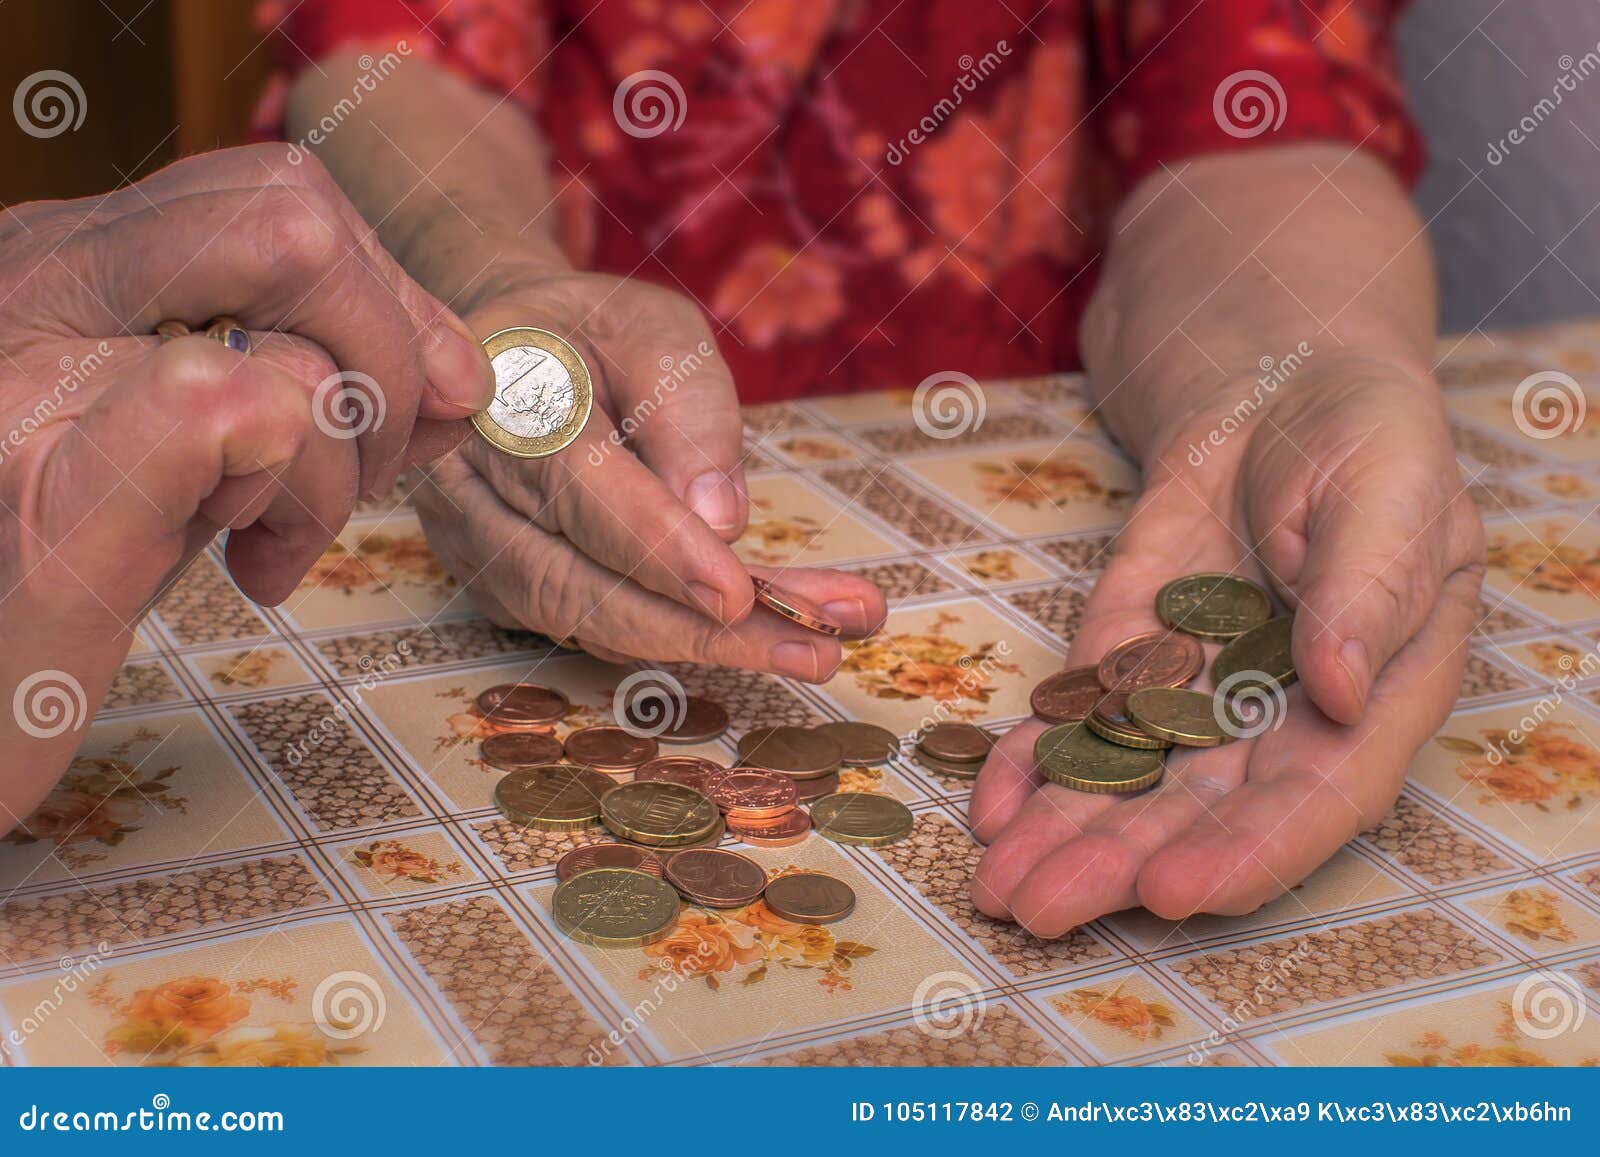 old woman with financial problems